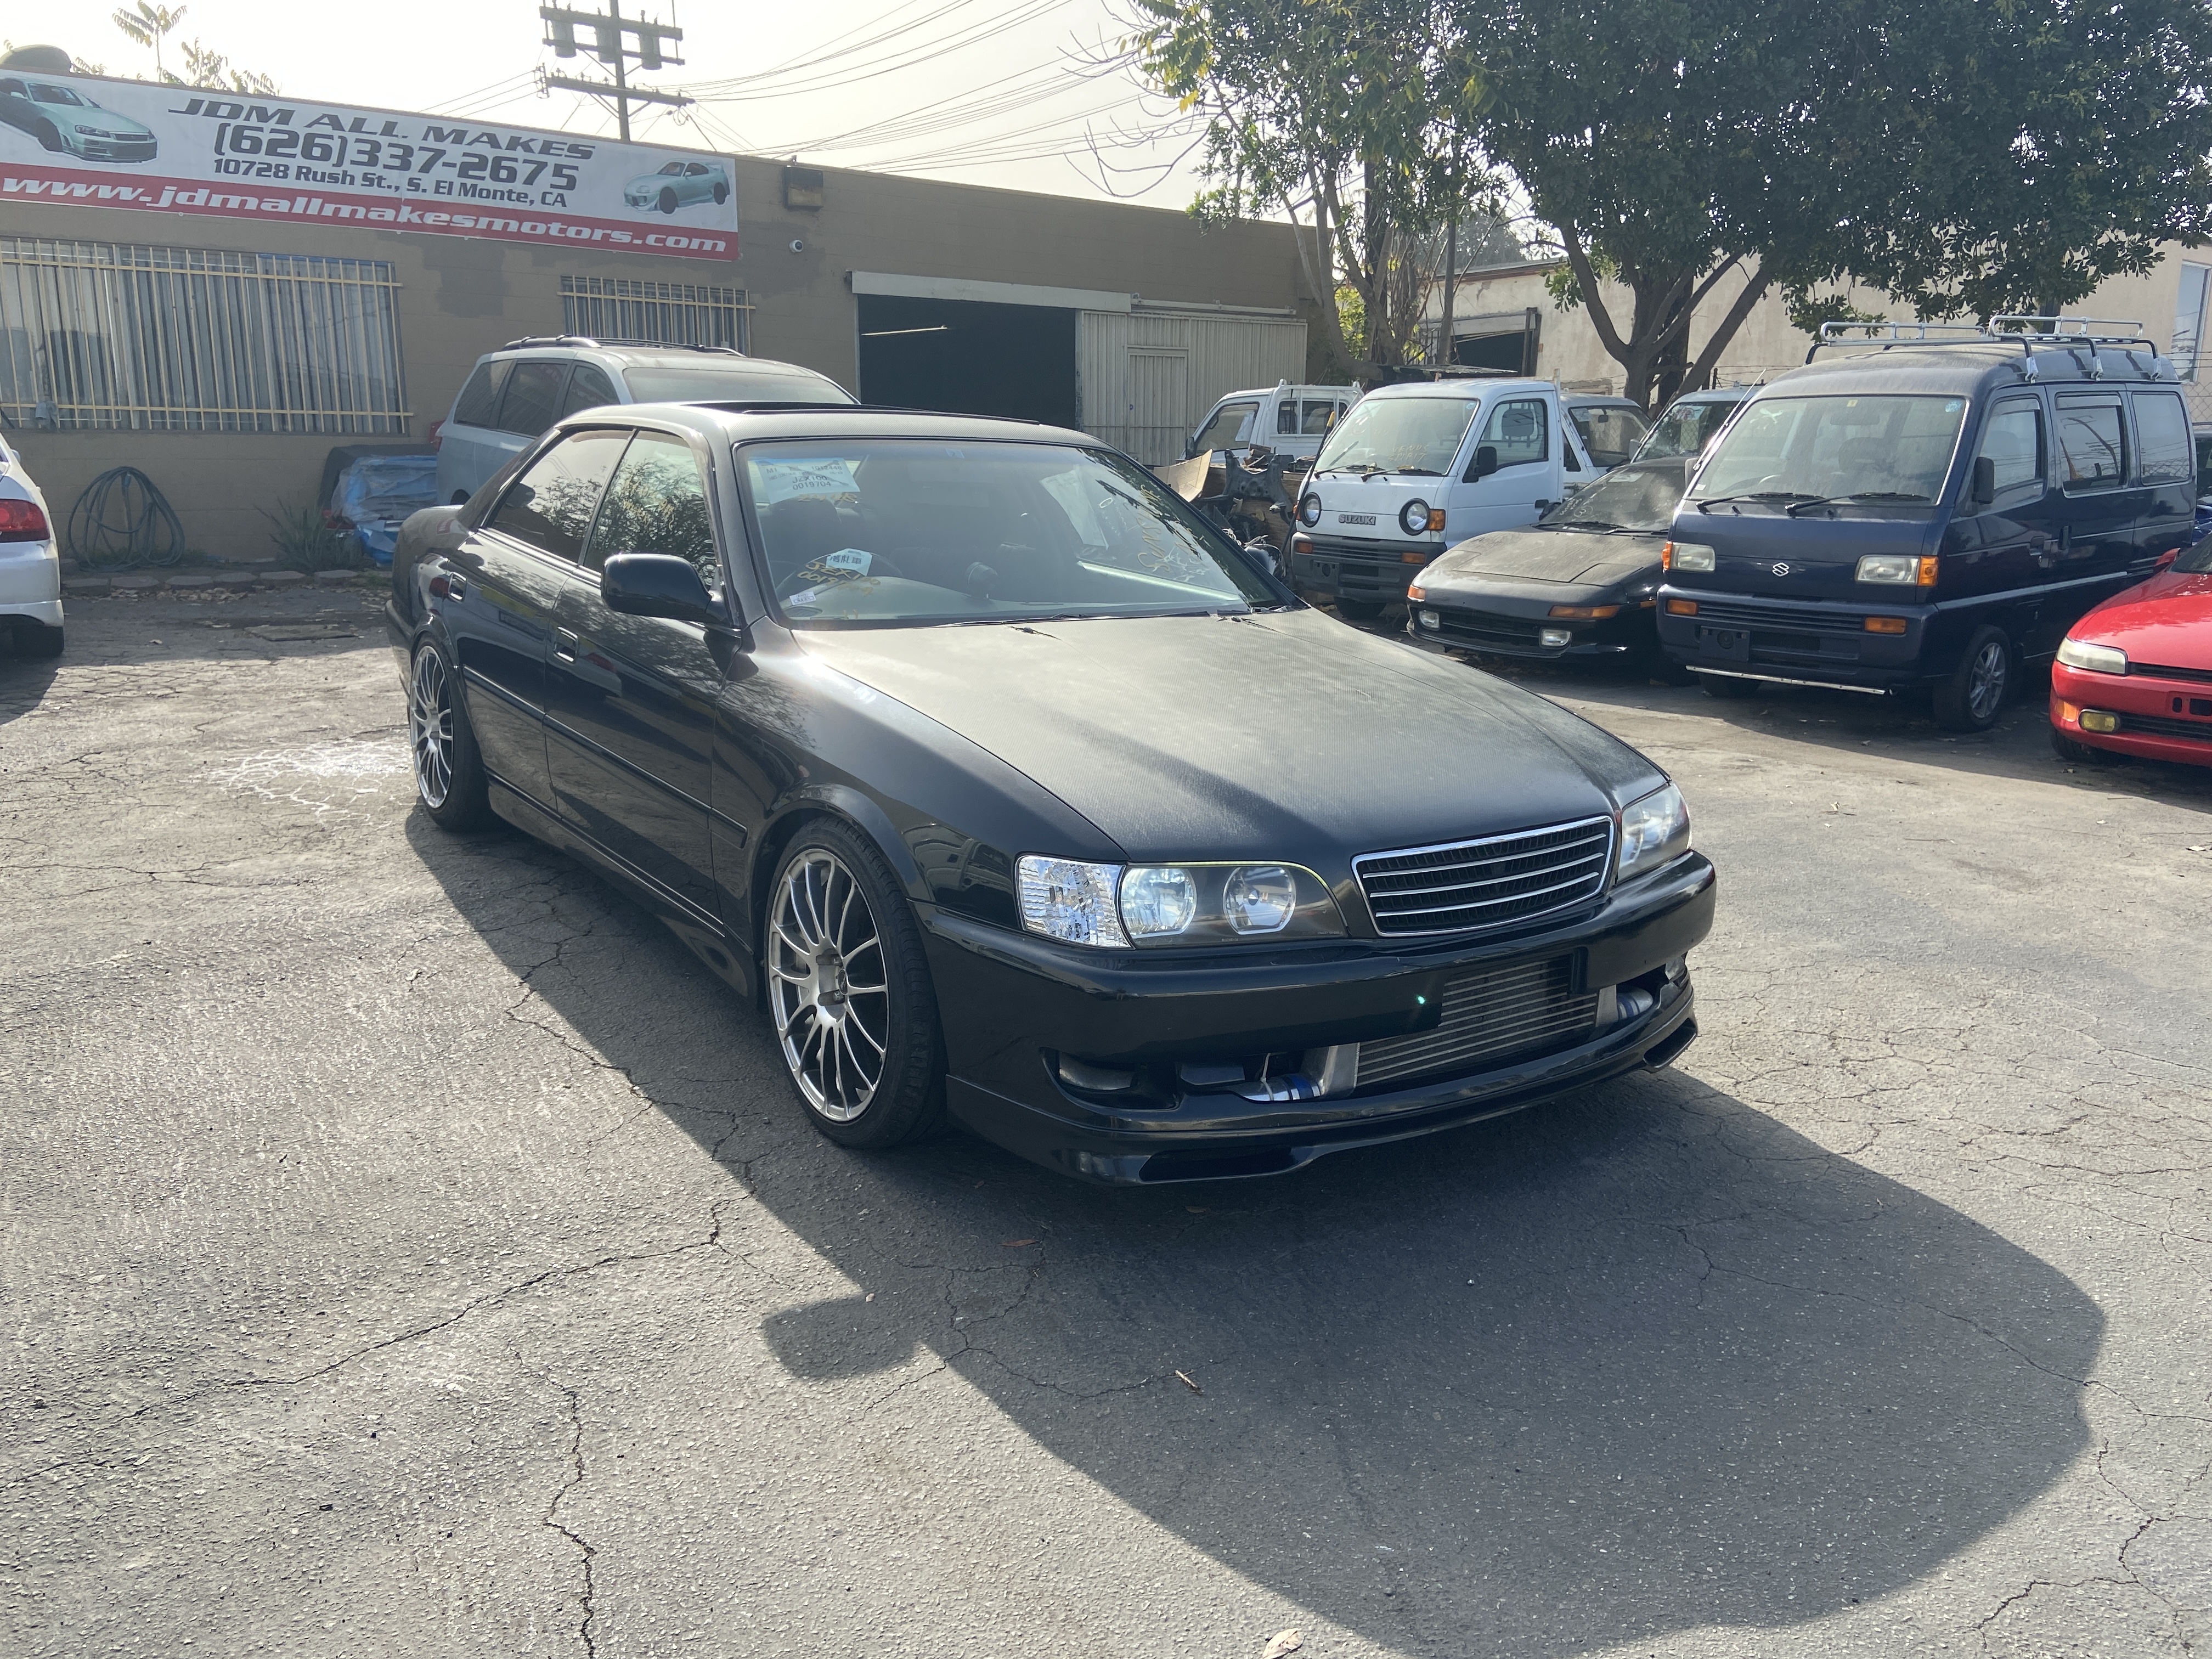 jzx100 for sale california